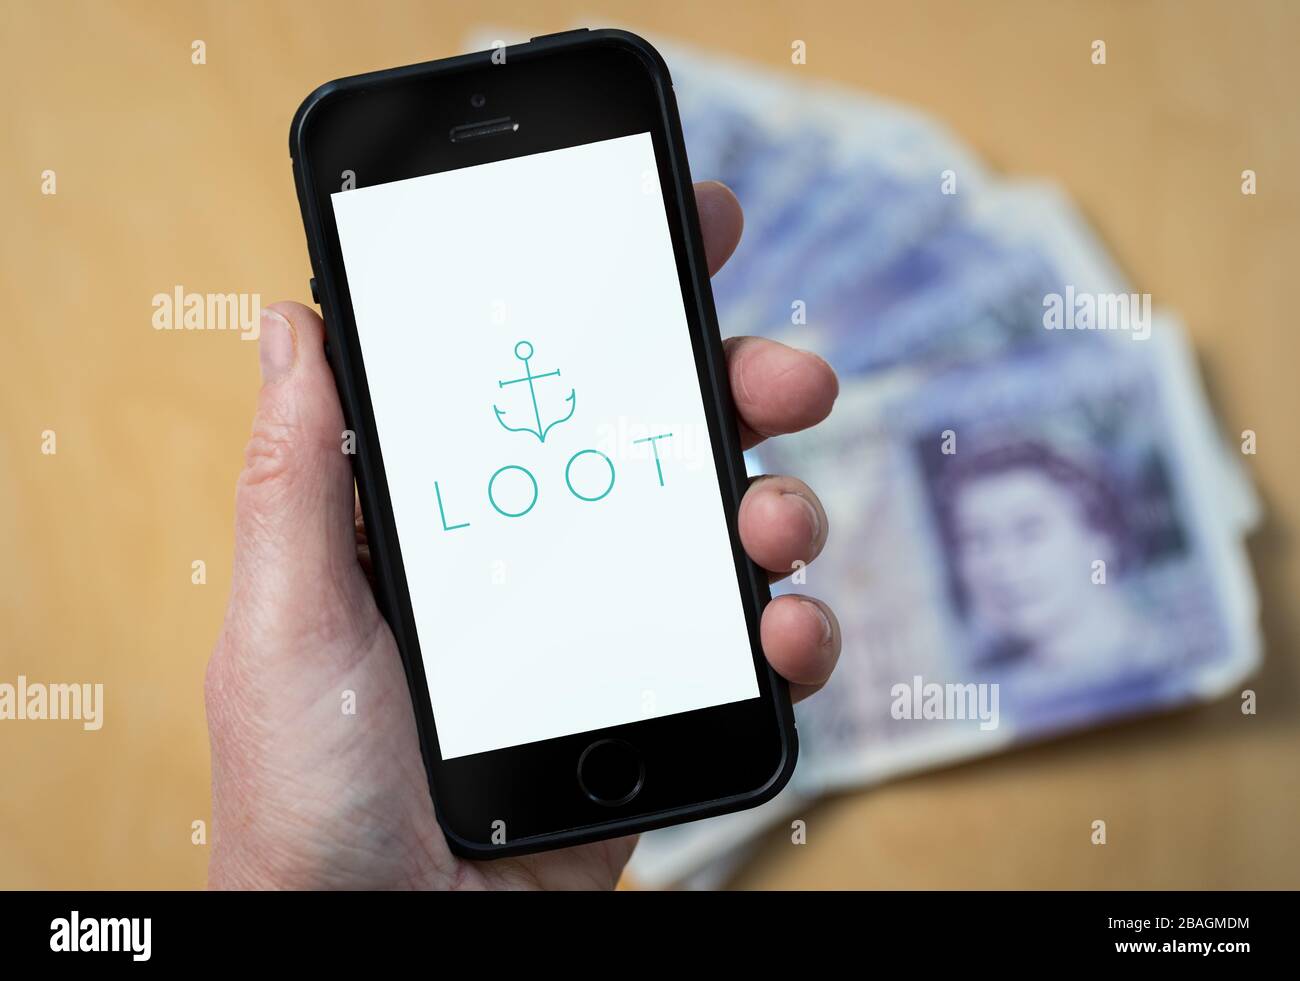 A woman looking at the Loot digital banking logo on a mobile phone. (editorial Use Only) Stock Photo